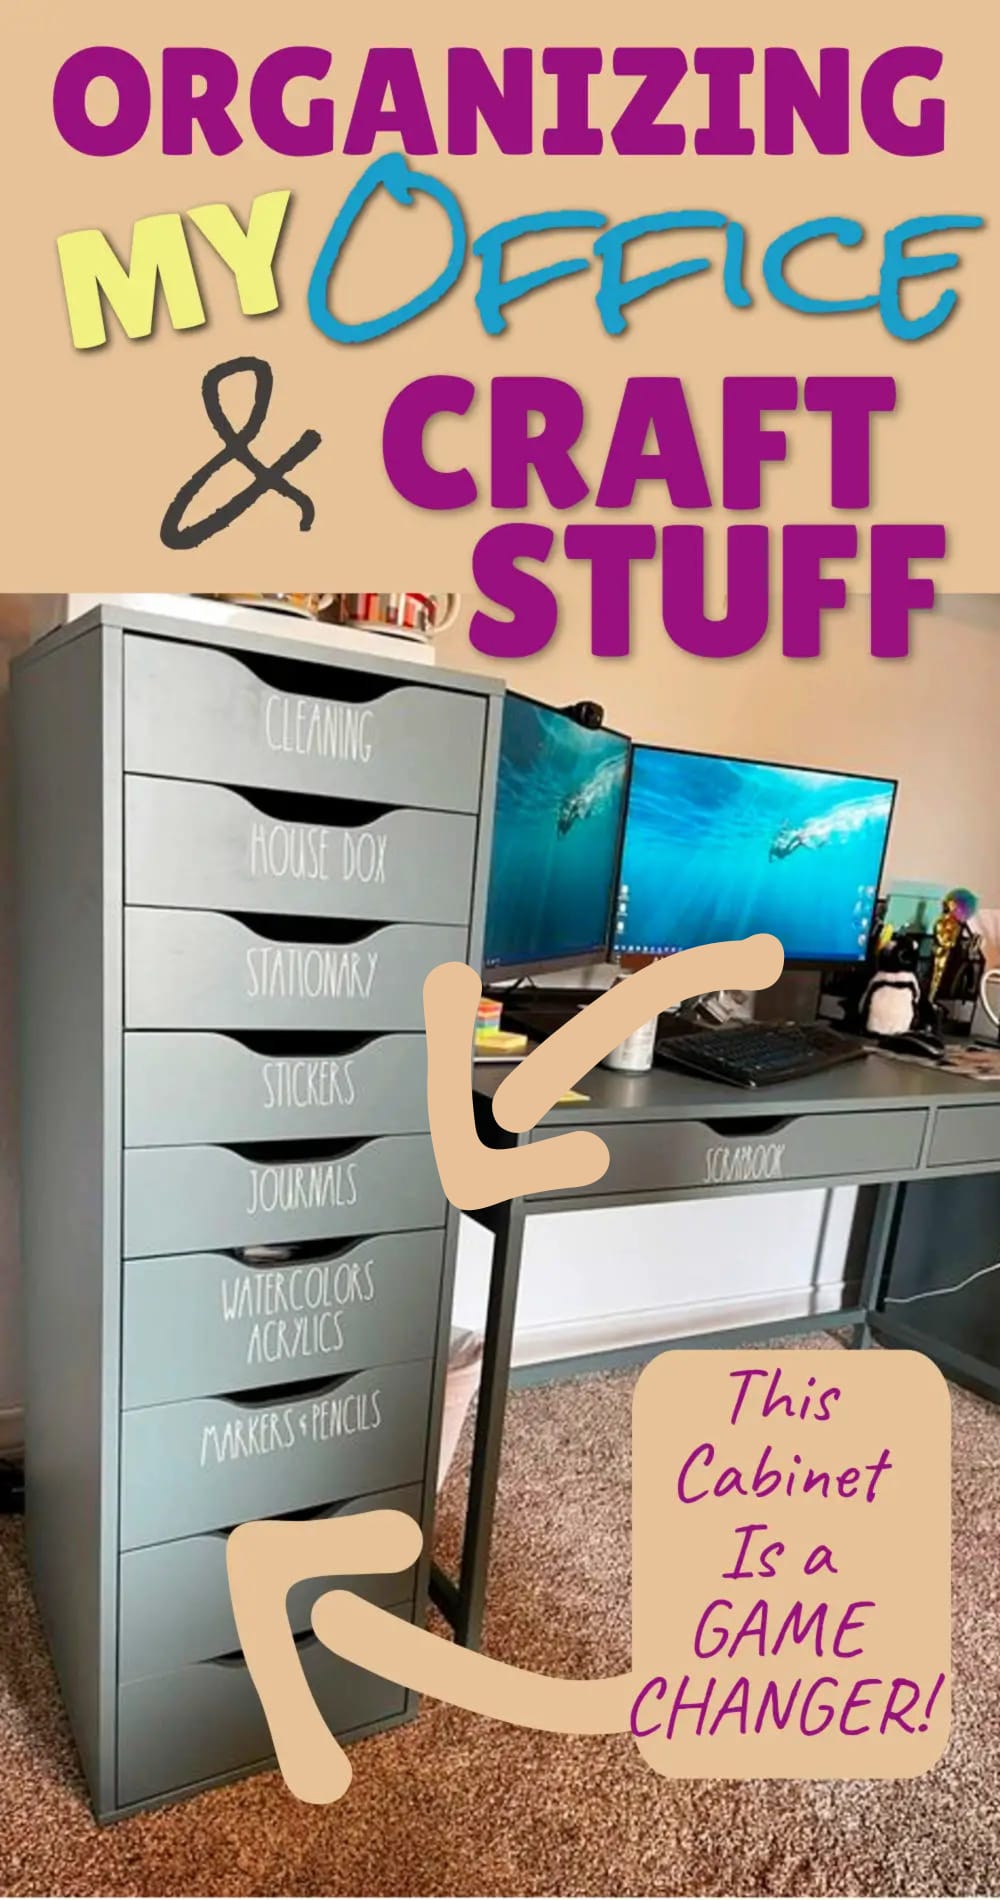 Guest bedroom home office combo organization - filing cabinet organizer for my craft supplies, paperwork and important house documents